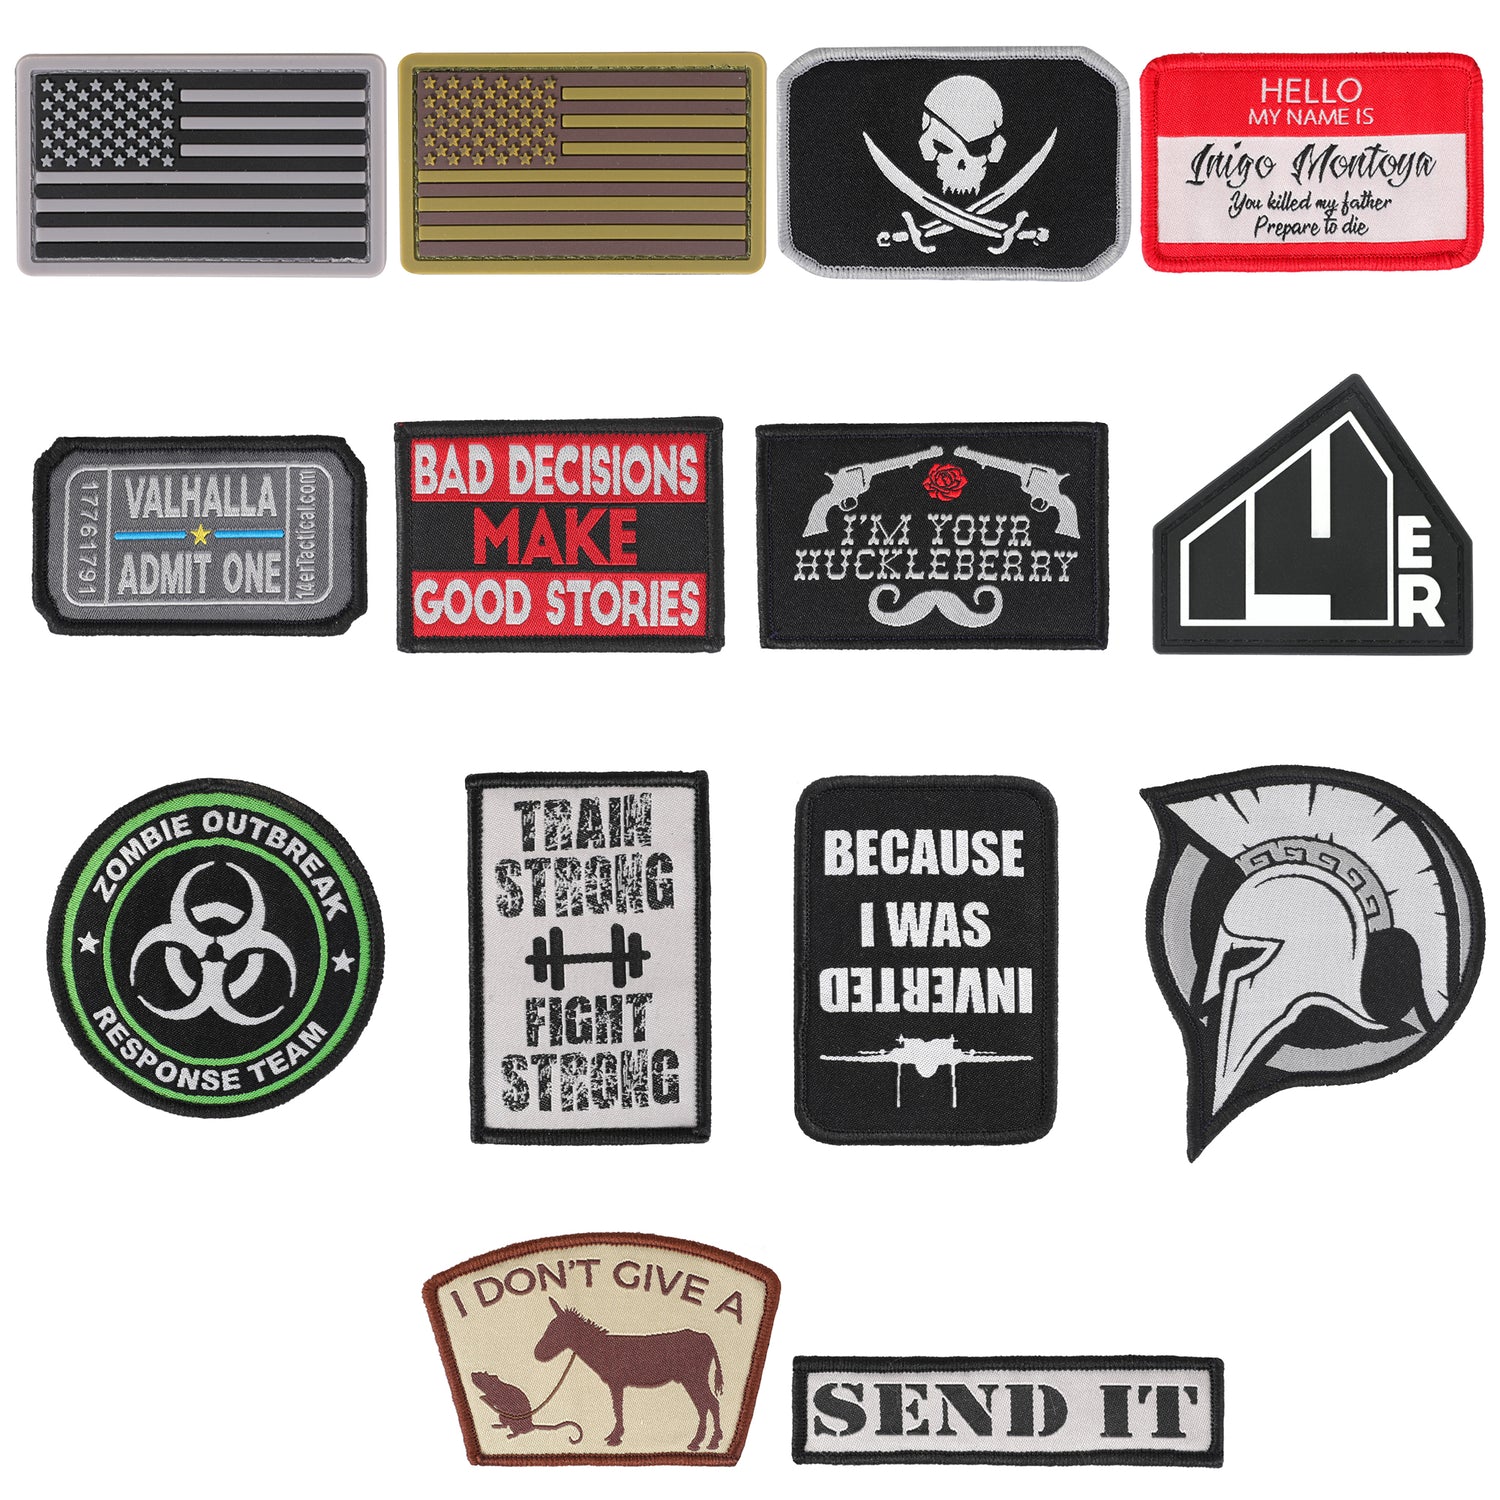 14er Tactical Morale Patches (21-Pack), Hook & Loop Backed, 3” x 2”  Embroidered, Perfect Patch Bundle for Hat, Backpack, Jacket, Military,  Police, Airsoft Gear